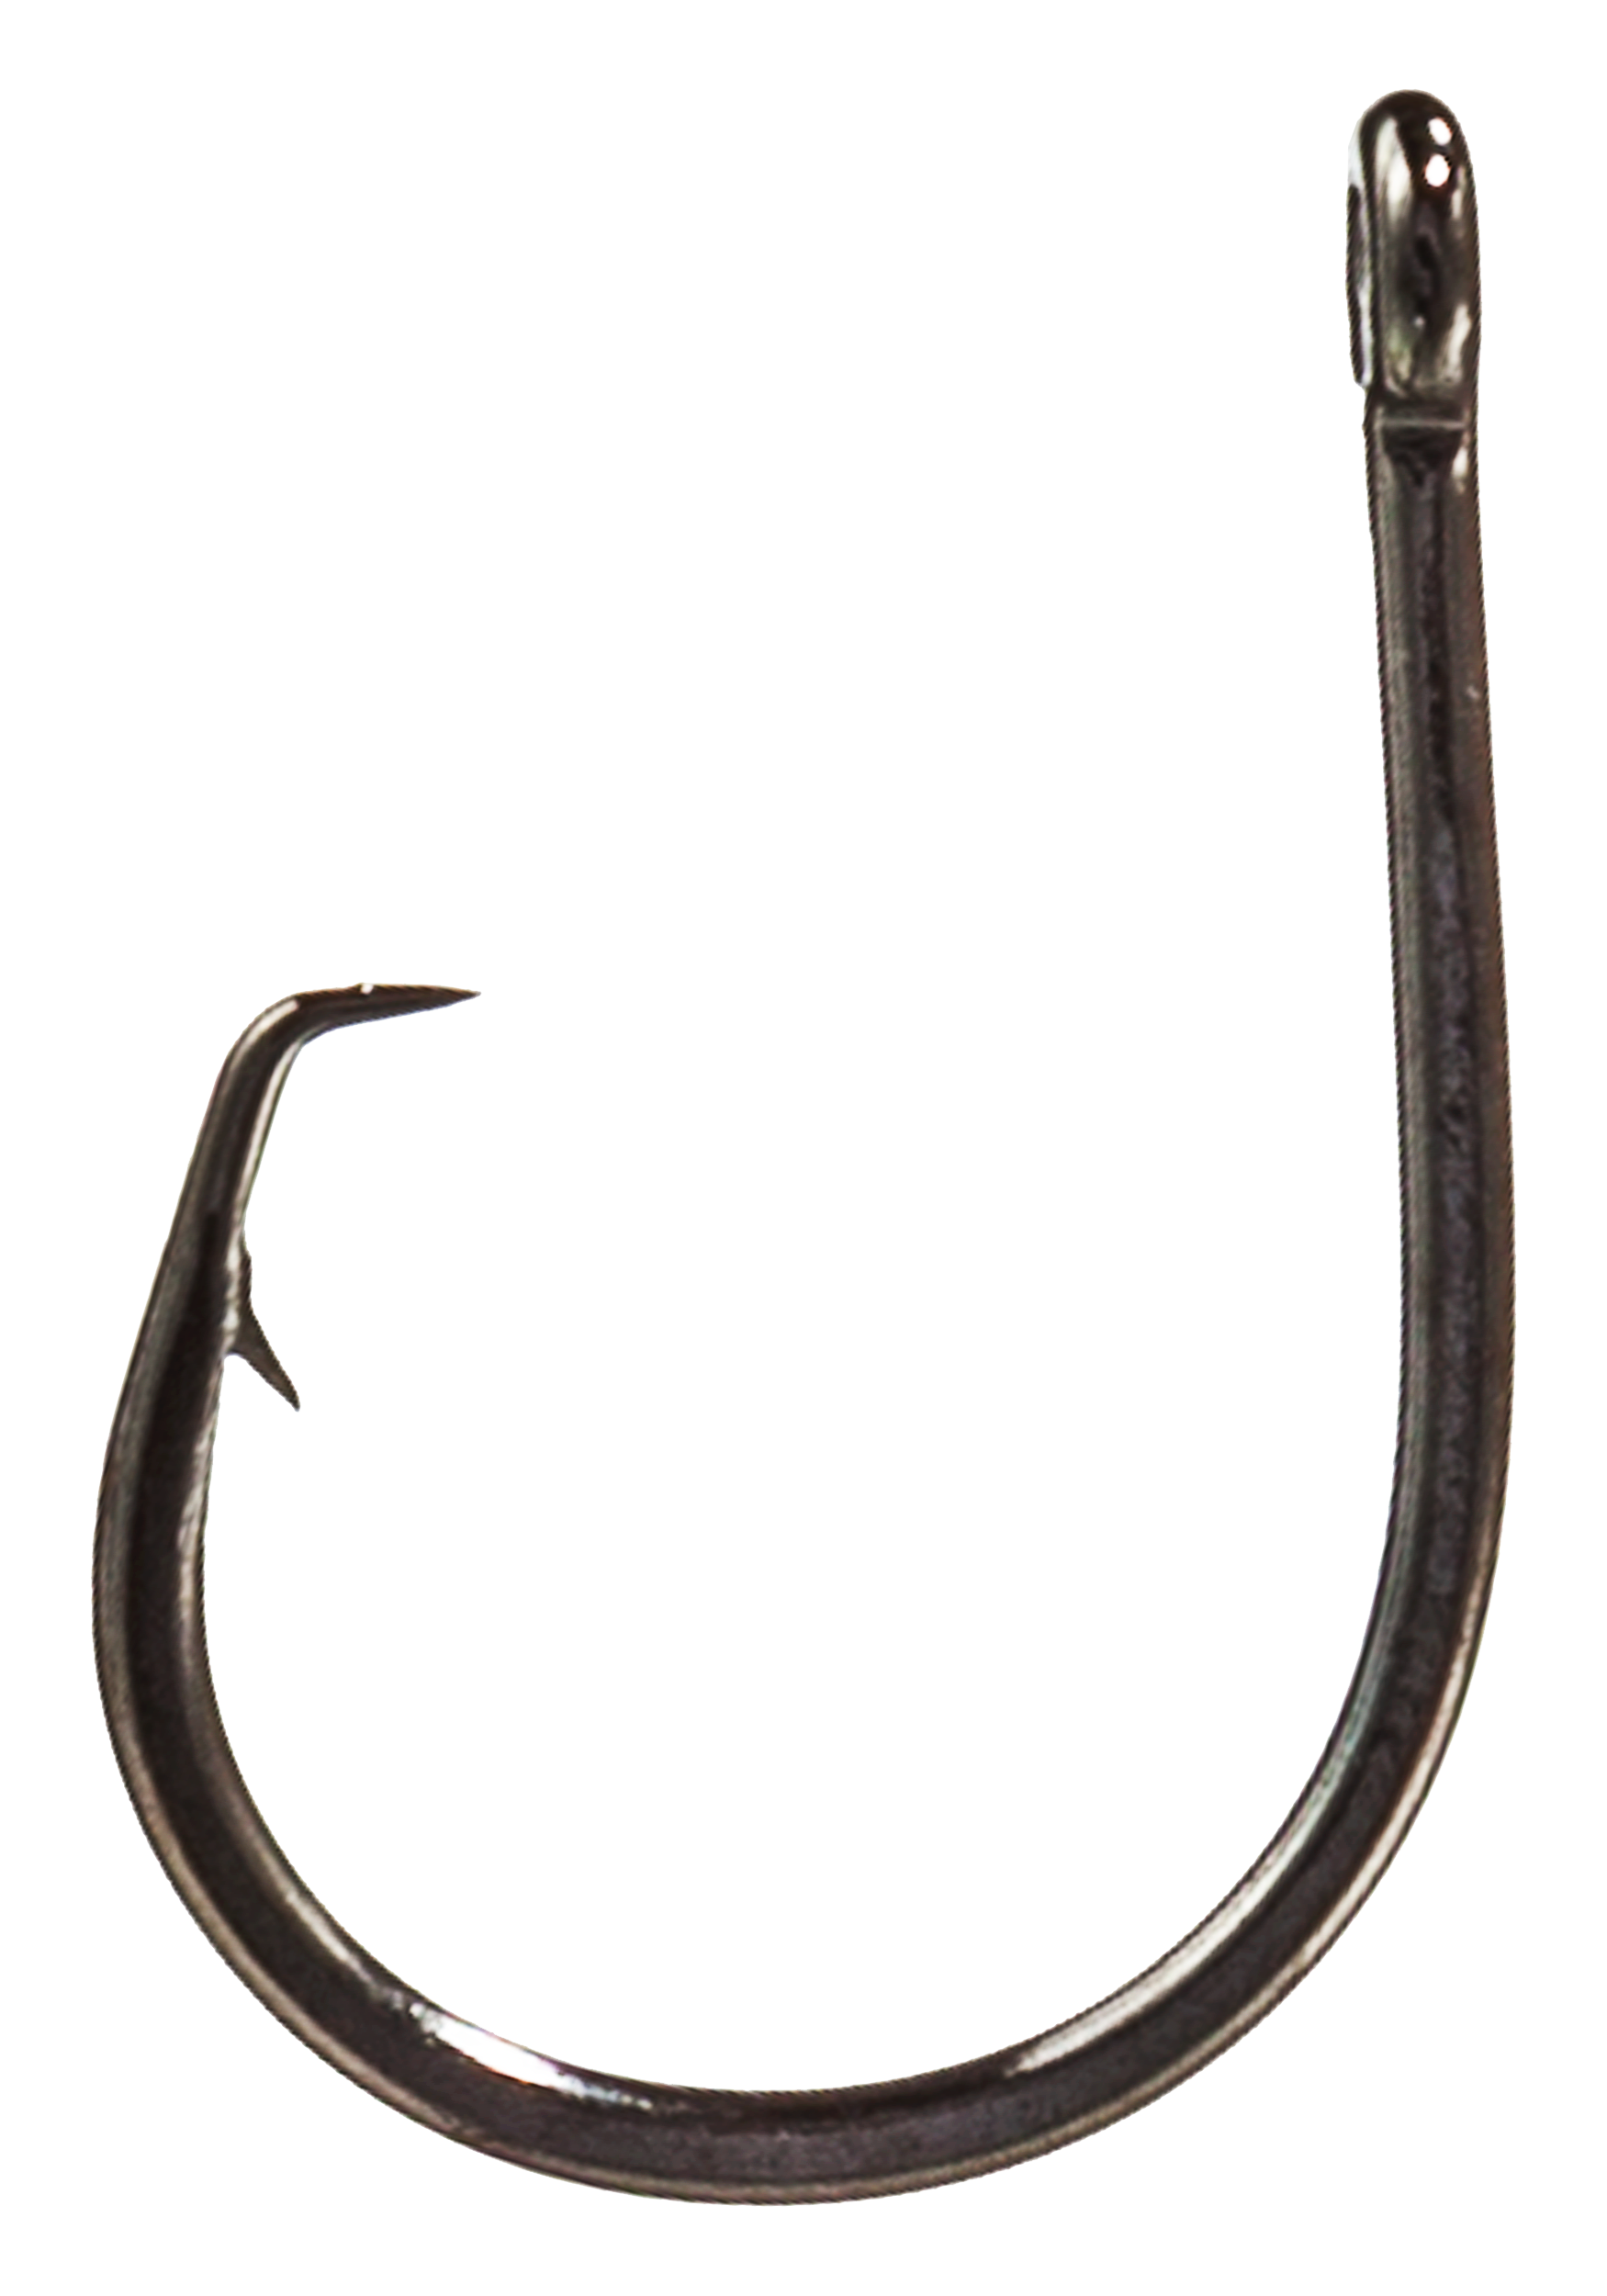 OWNER Mosquito Bait Hooks Pro Pack 5377-091 Size 2 - Black Chrome - Pack of  51